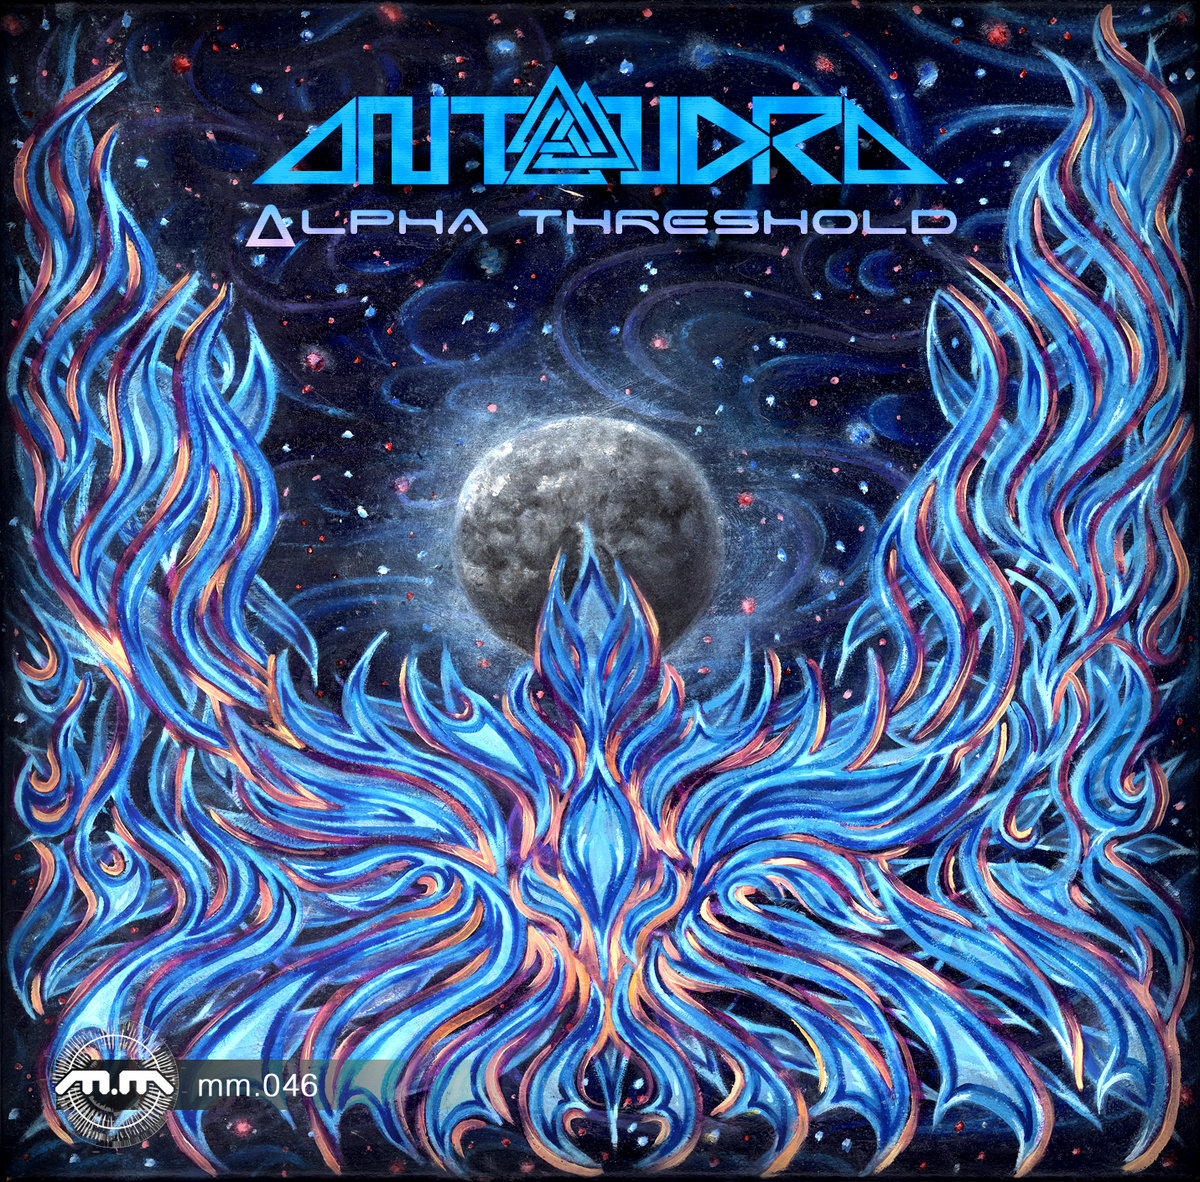 Antandra - The Village in the Sky @ 'Alpha Threshold' album (ambient, downtempo)